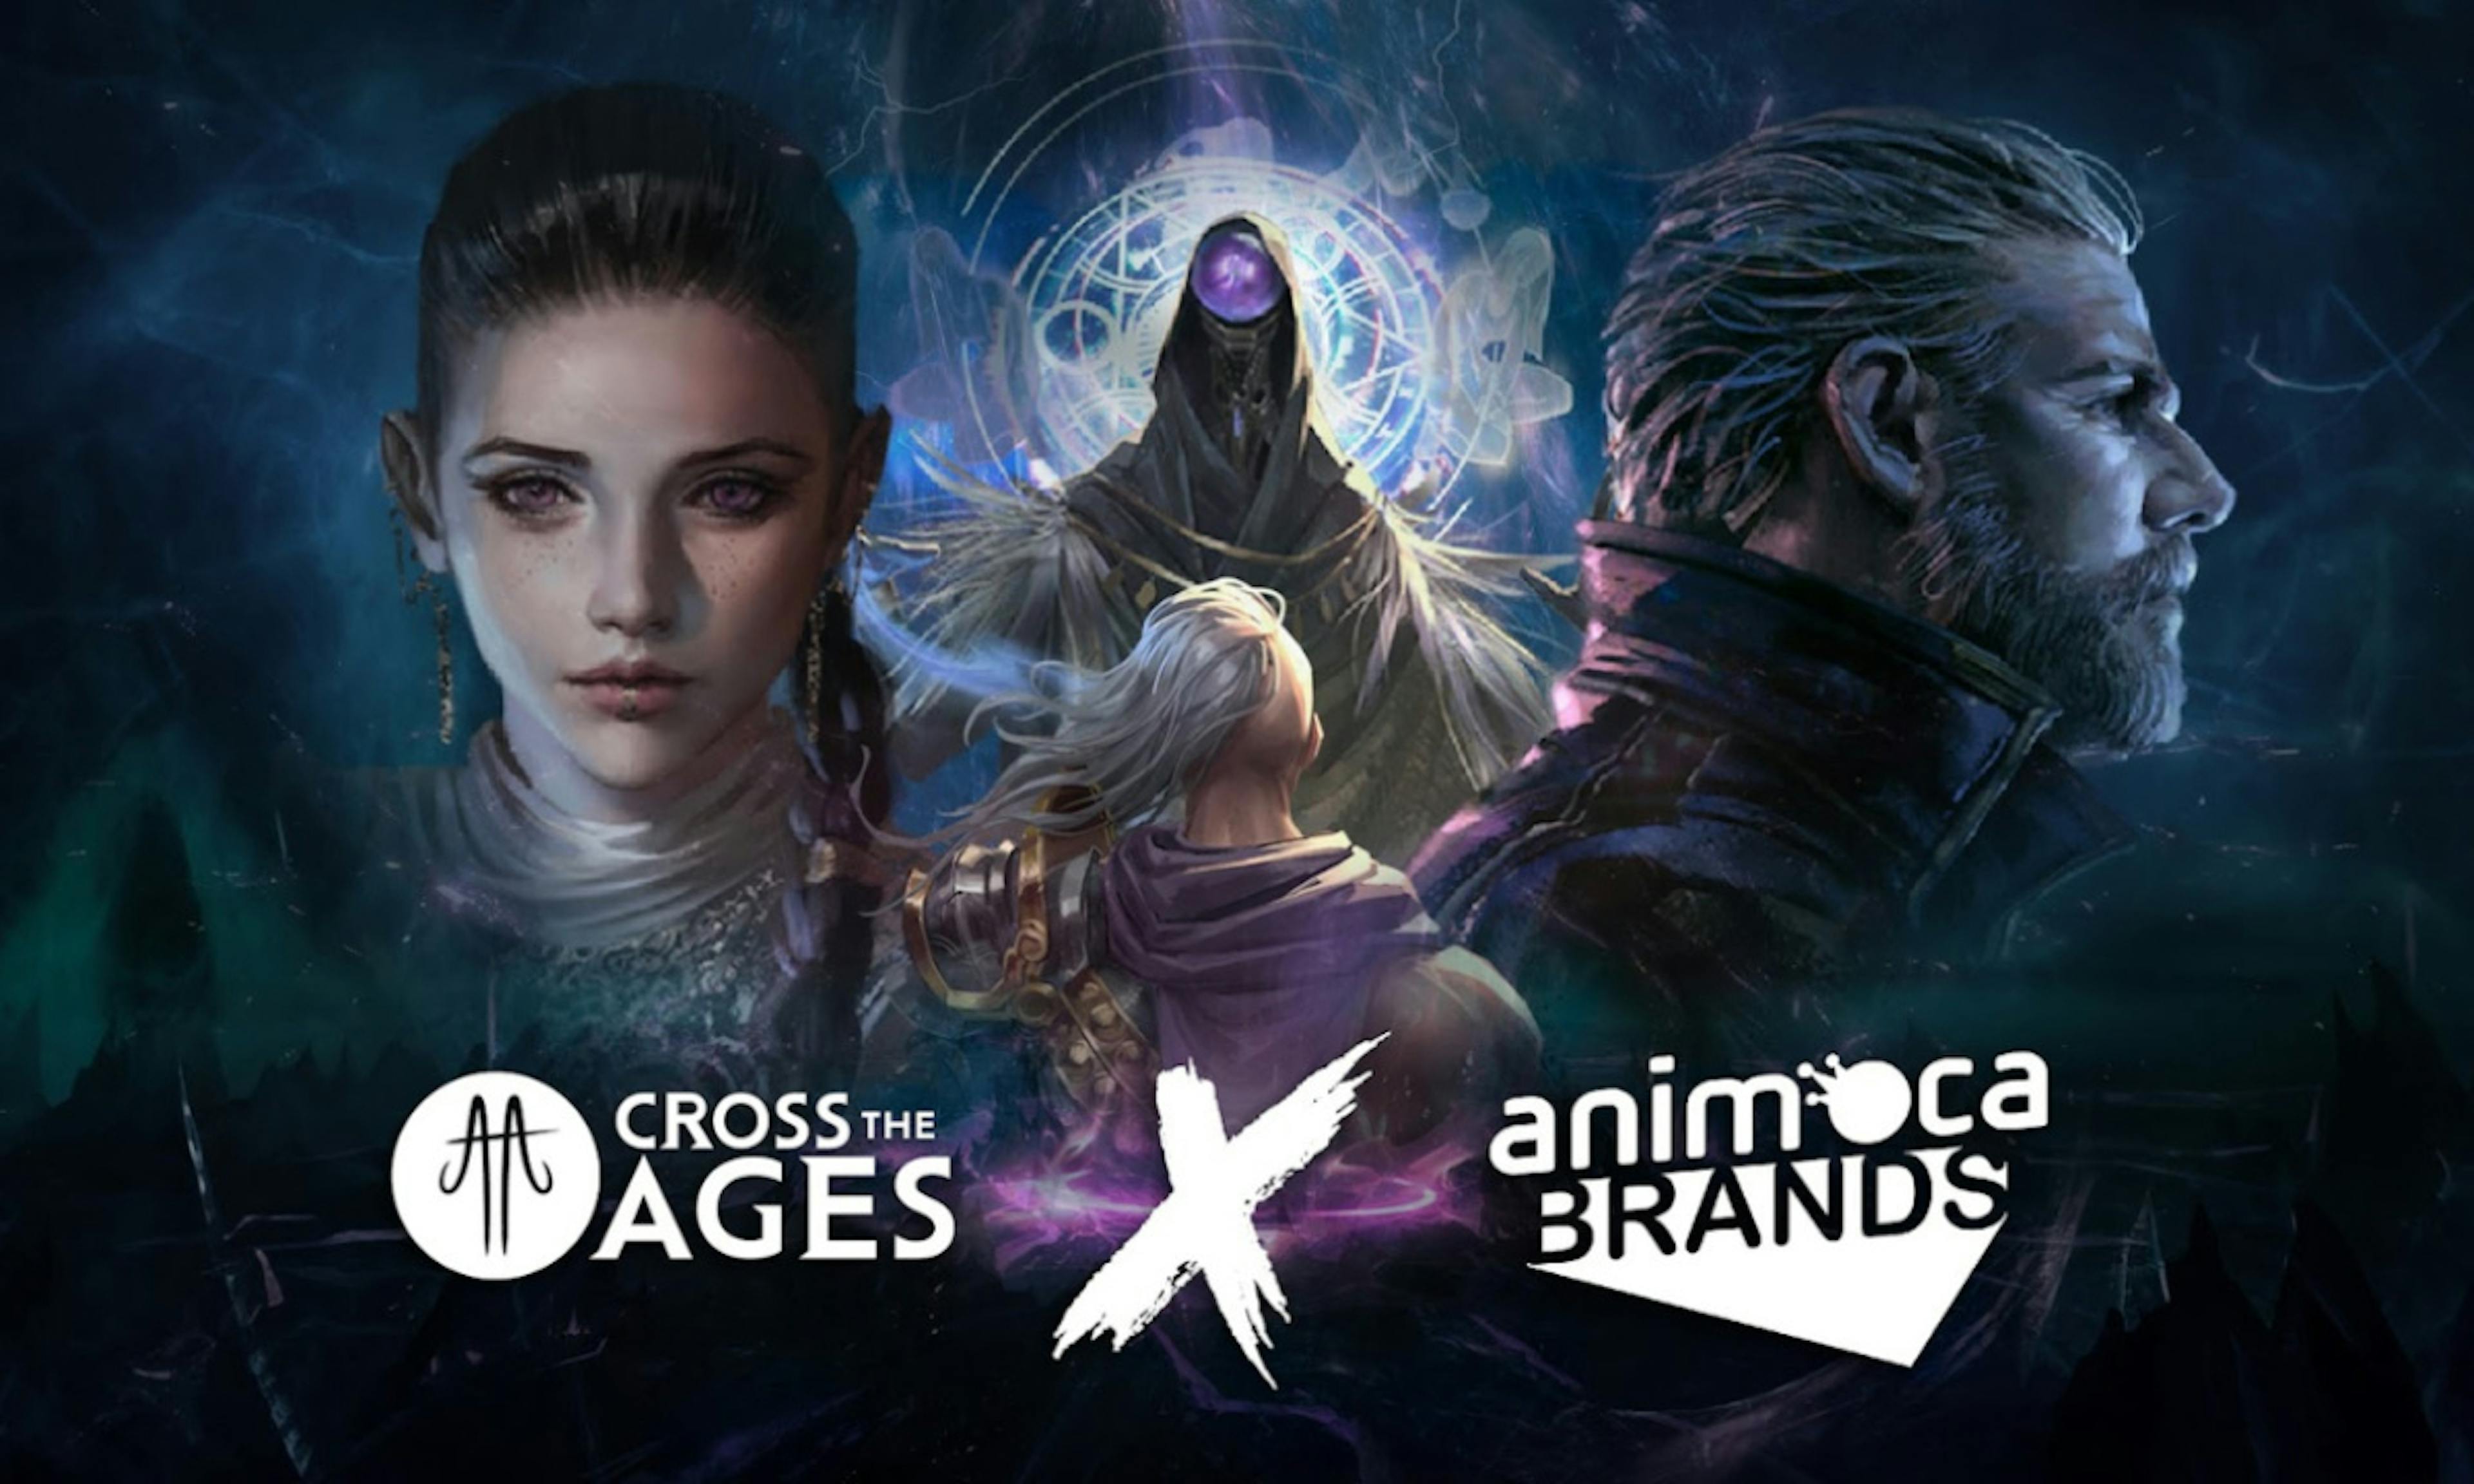 featured image - CROSS THE AGES Raises $3.5M In Equity Round Led By Animoca Brands And Lists On Major Exchanges